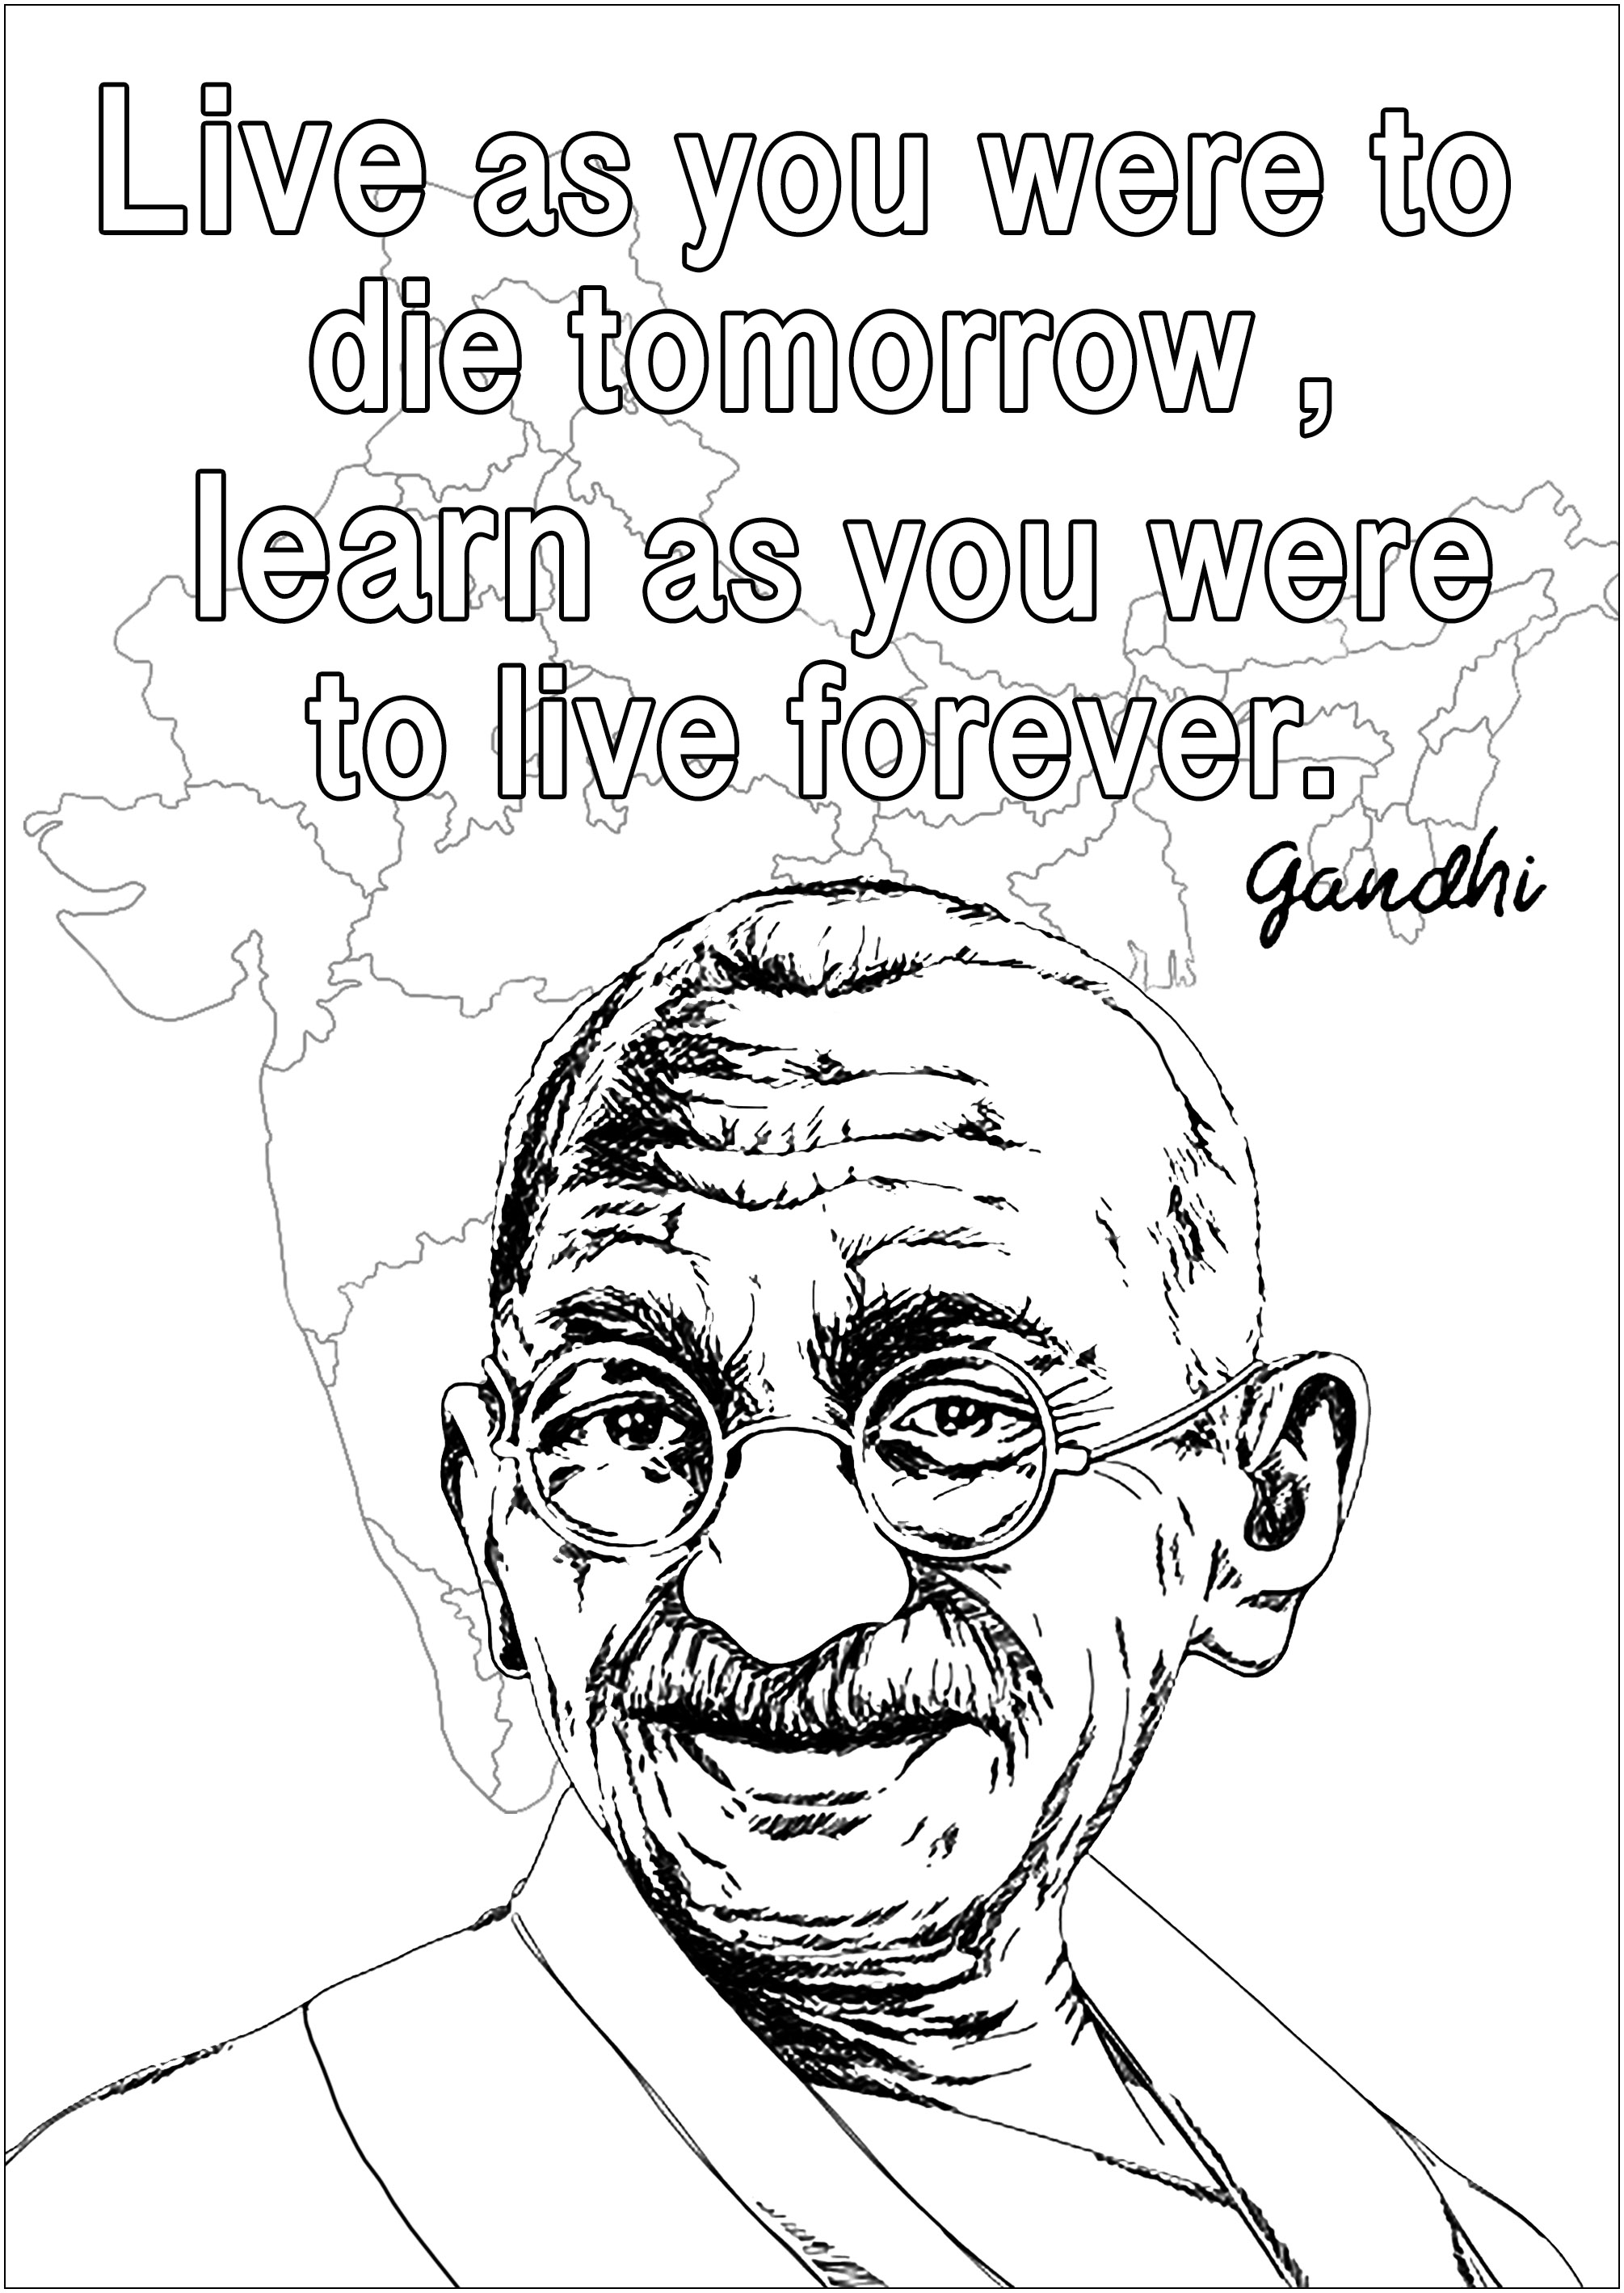 Coloring page of Gandhi : 'Live as if you were to die tomorrow. Learn as if you were to live forever.'